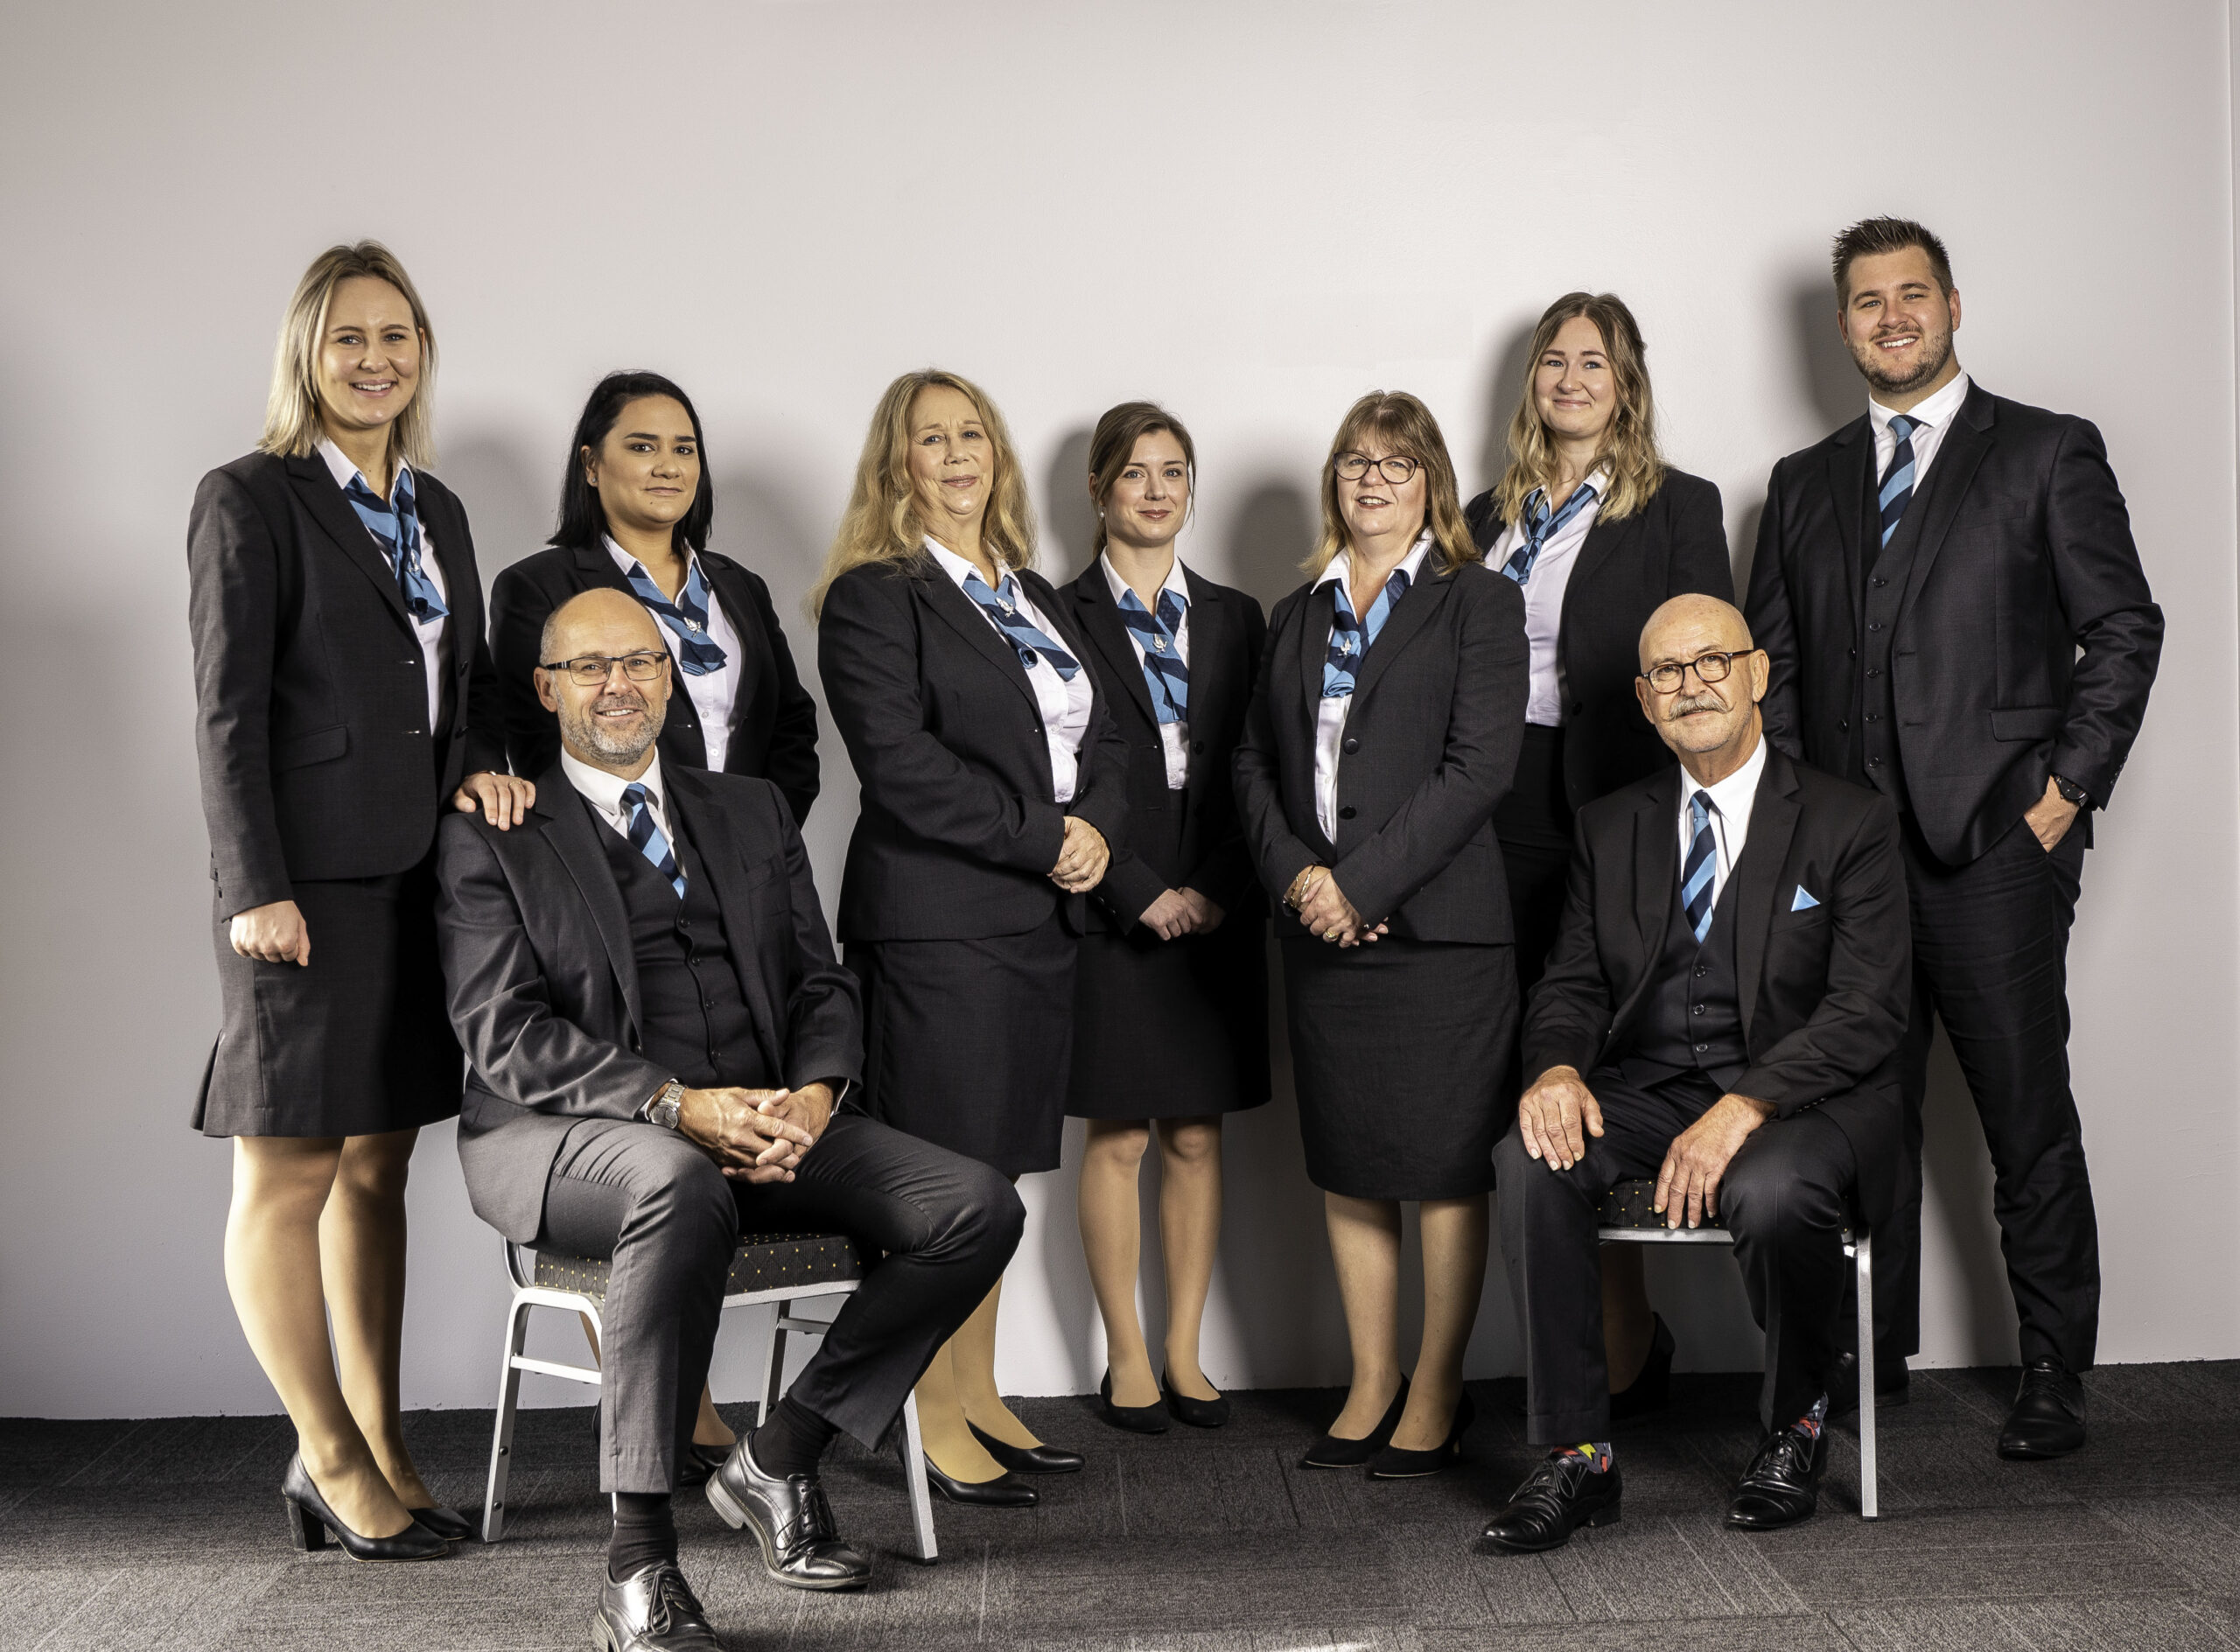 funeral directors group photo